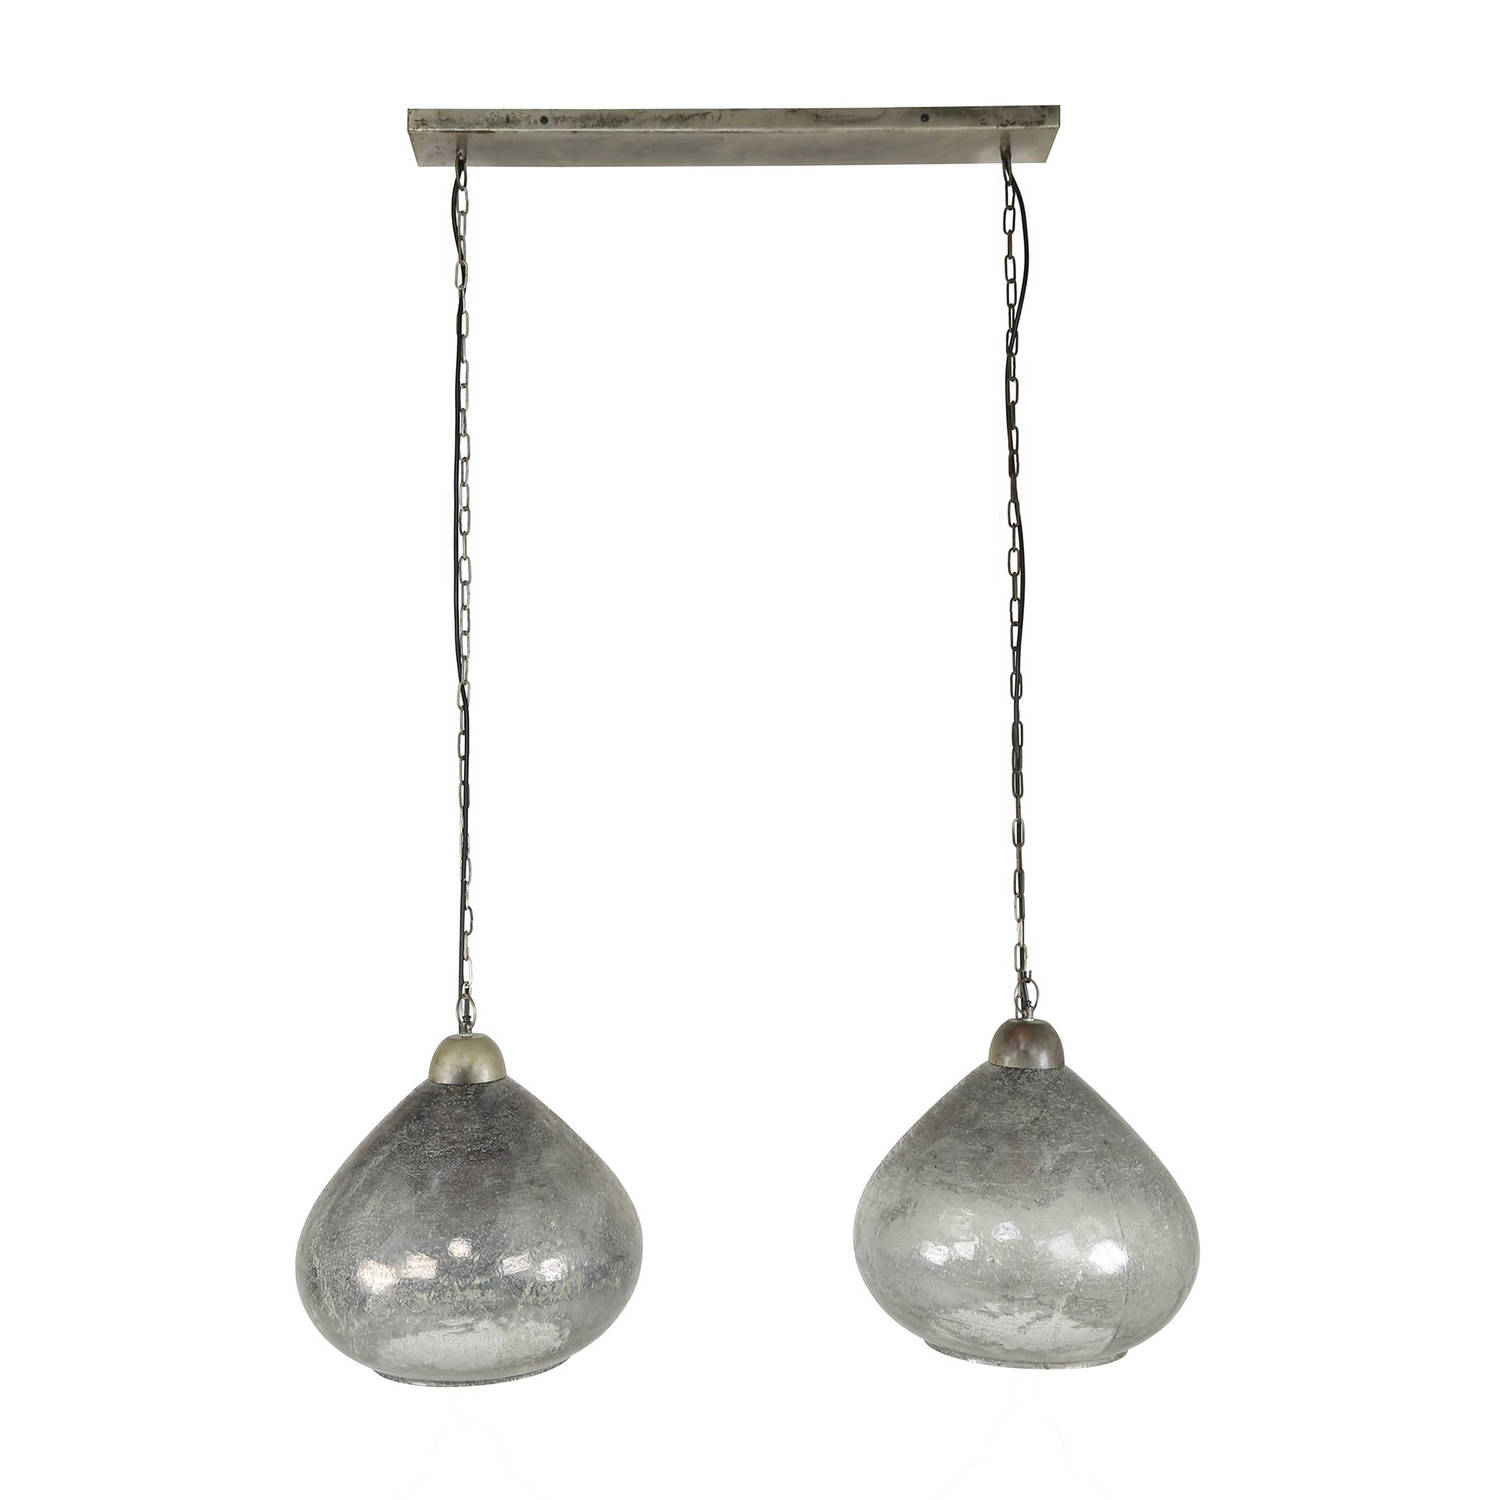 Giga Meubel Gm Hanglamp Glas - 2-lichts - 40x105x150cm - Lamp Bell Clearstone